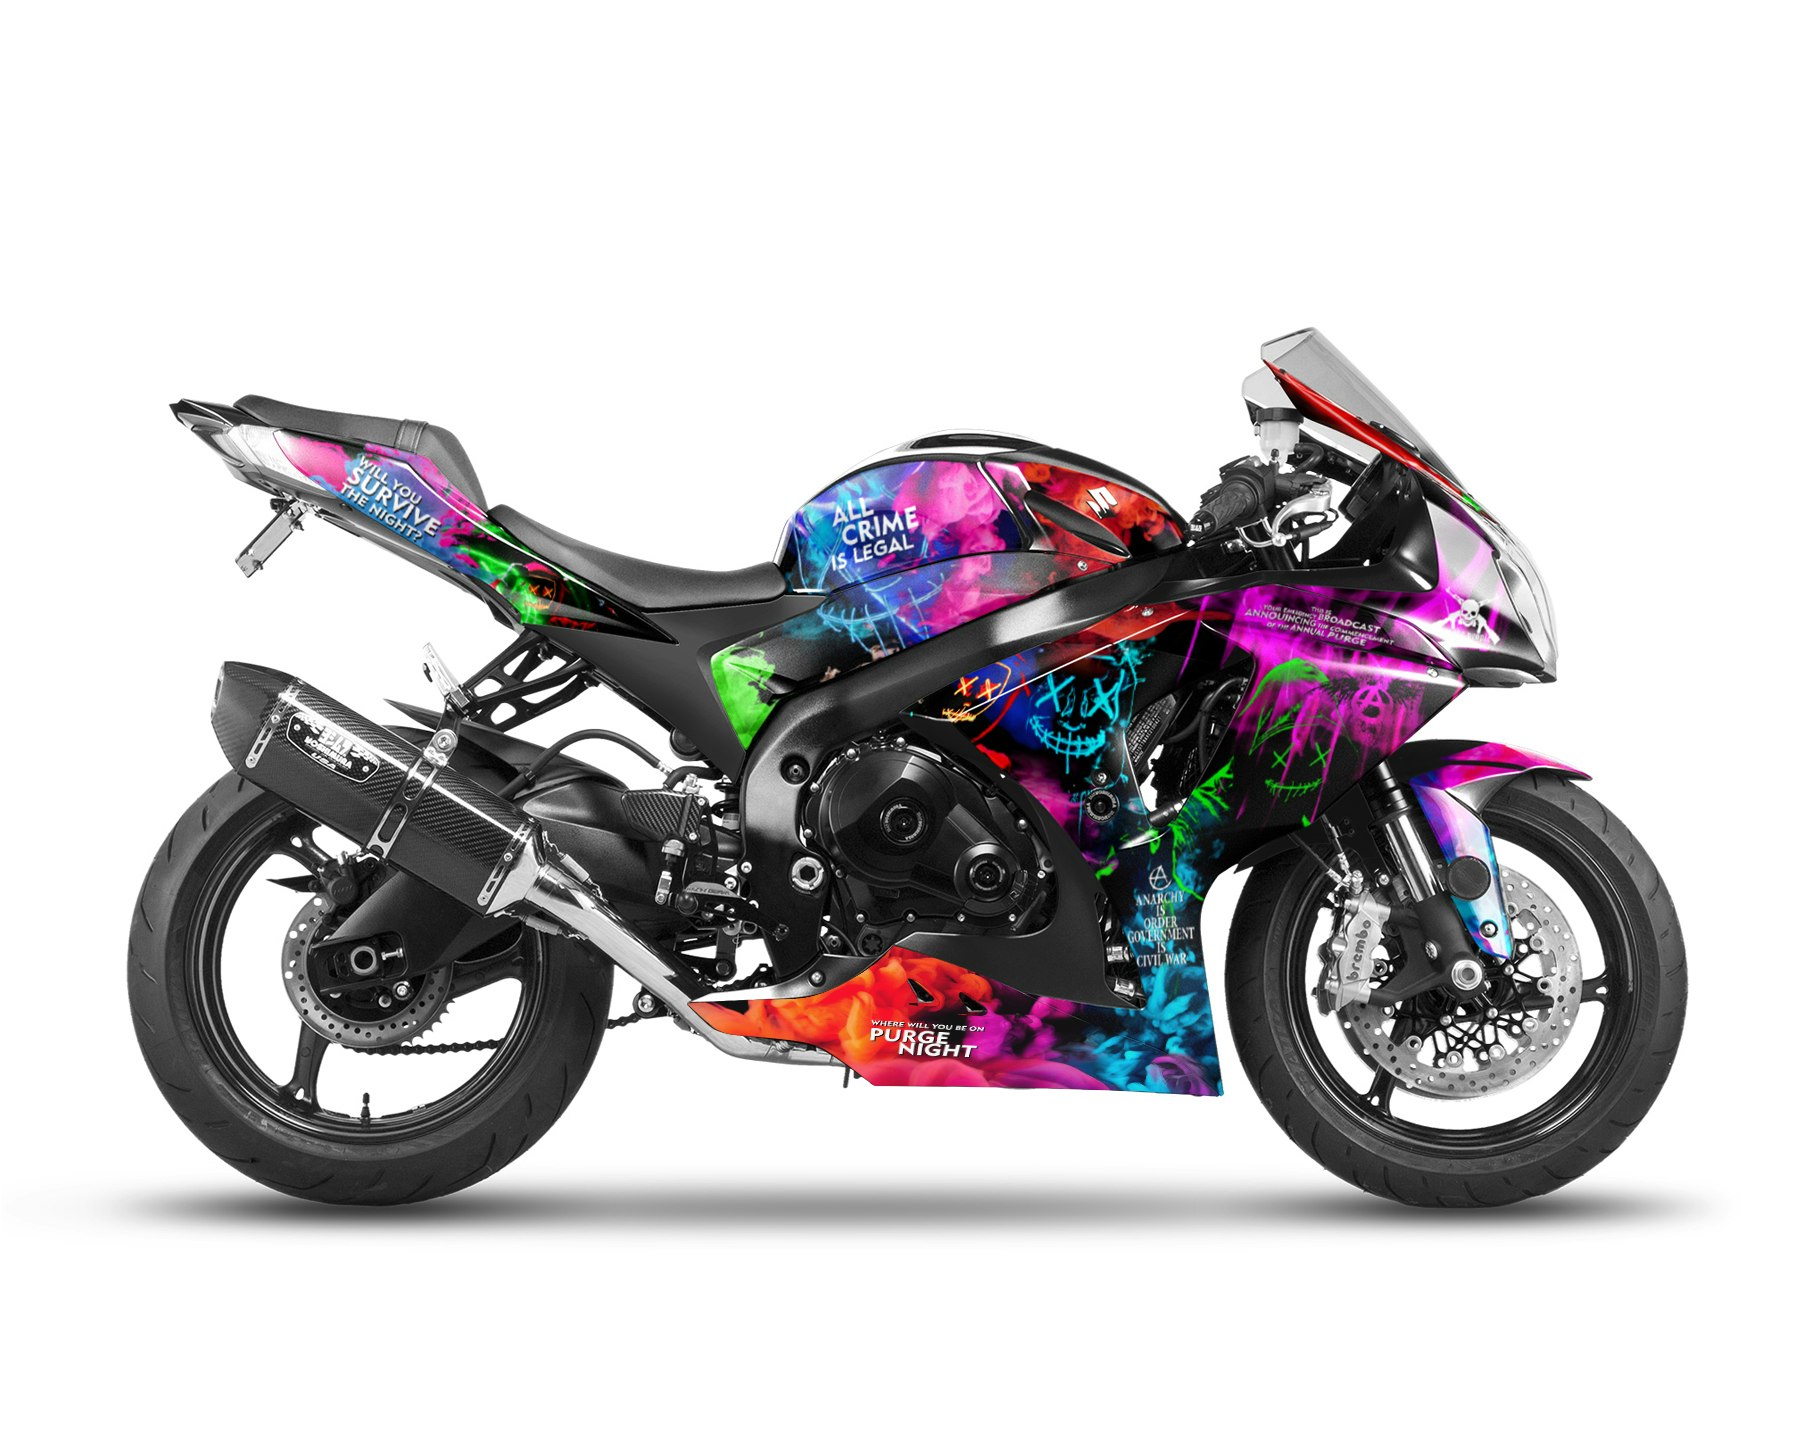 Suzuki GSXR 1000 Graphics Kit - "The Purge" 2009-2016 - SpinningStickers |  #1 Motorcycle & Powersport Graphics